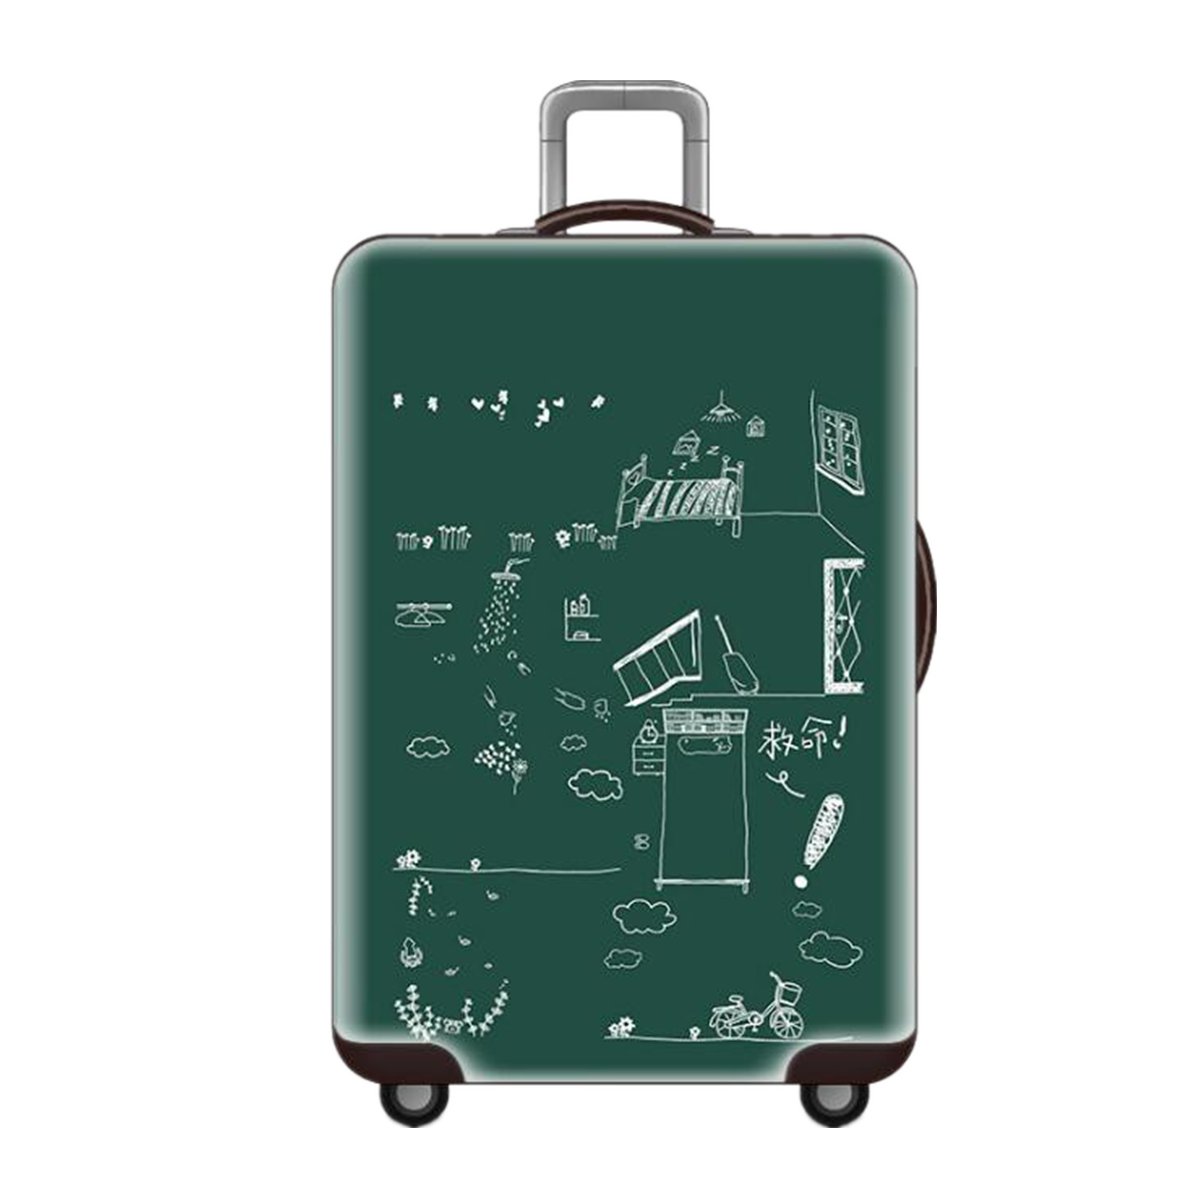 Elastic-Luggage-Cover-Travel-Suitcase-Protector-Dustproof-Protection-Trolley-Case-1465414